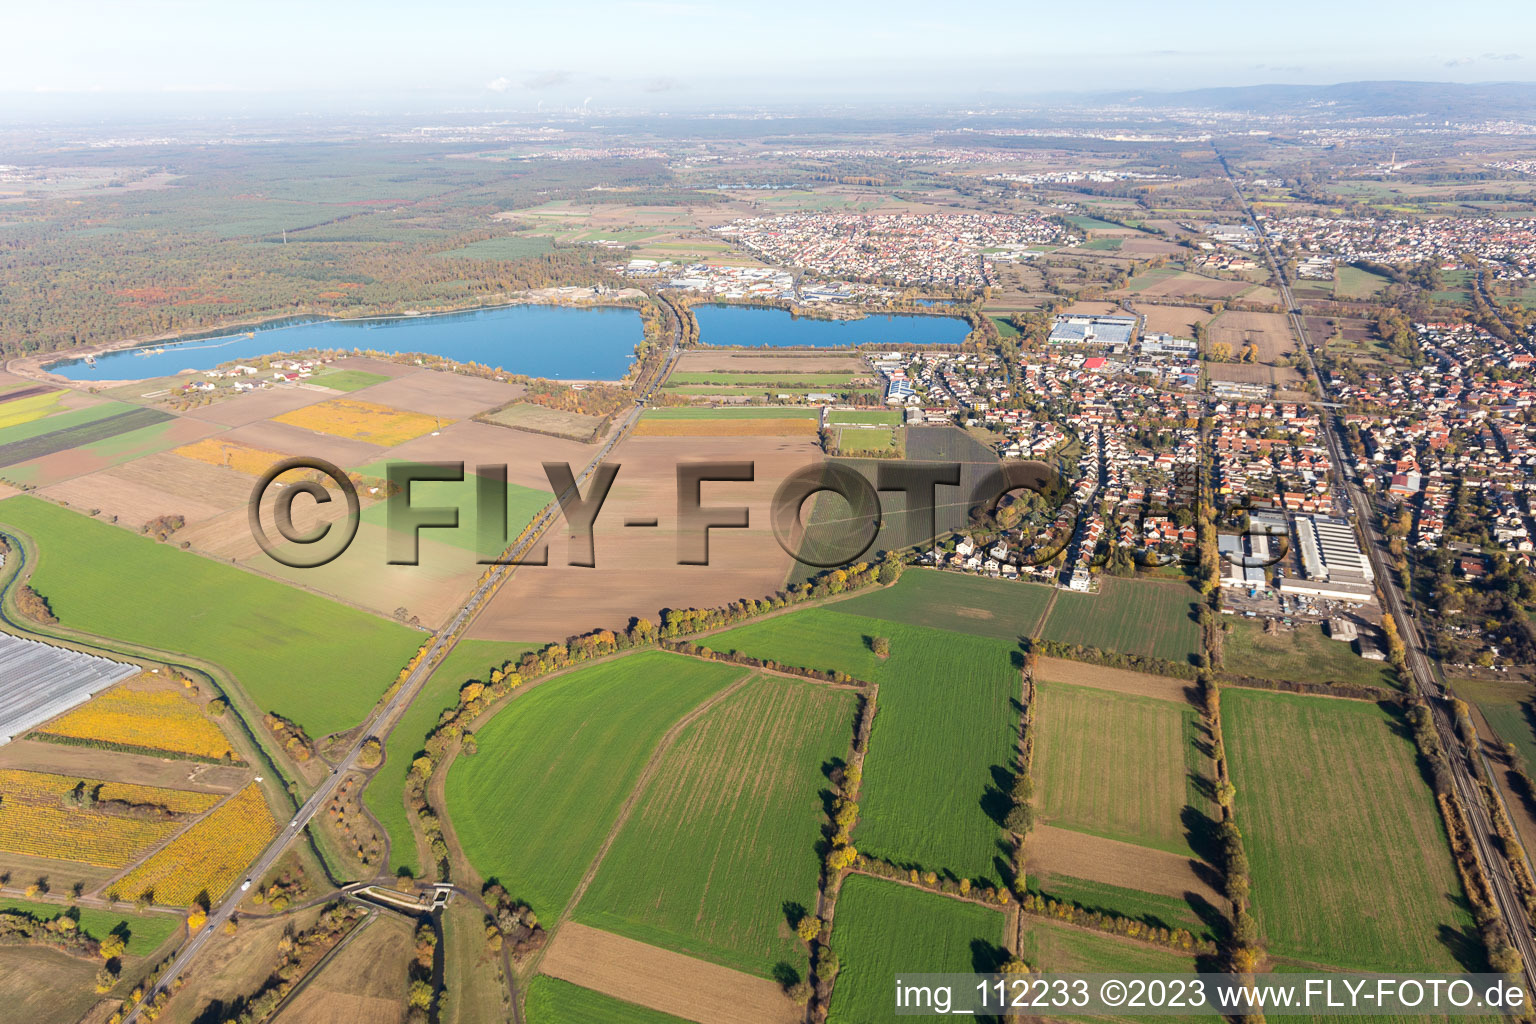 Stettfeld in the state Baden-Wuerttemberg, Germany seen from above